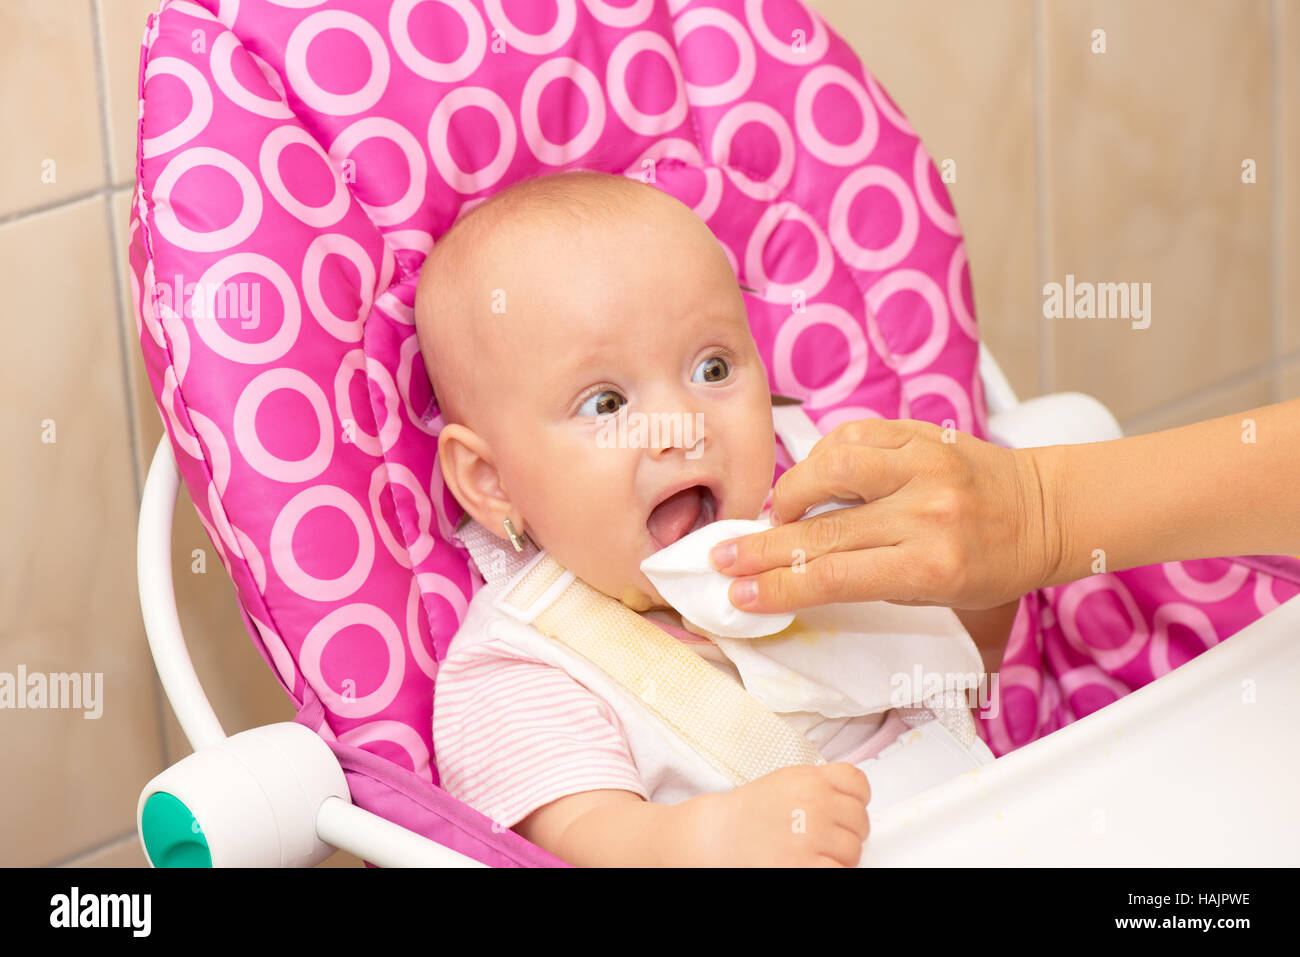 Mother cleaning baby's mouth Stock Photo